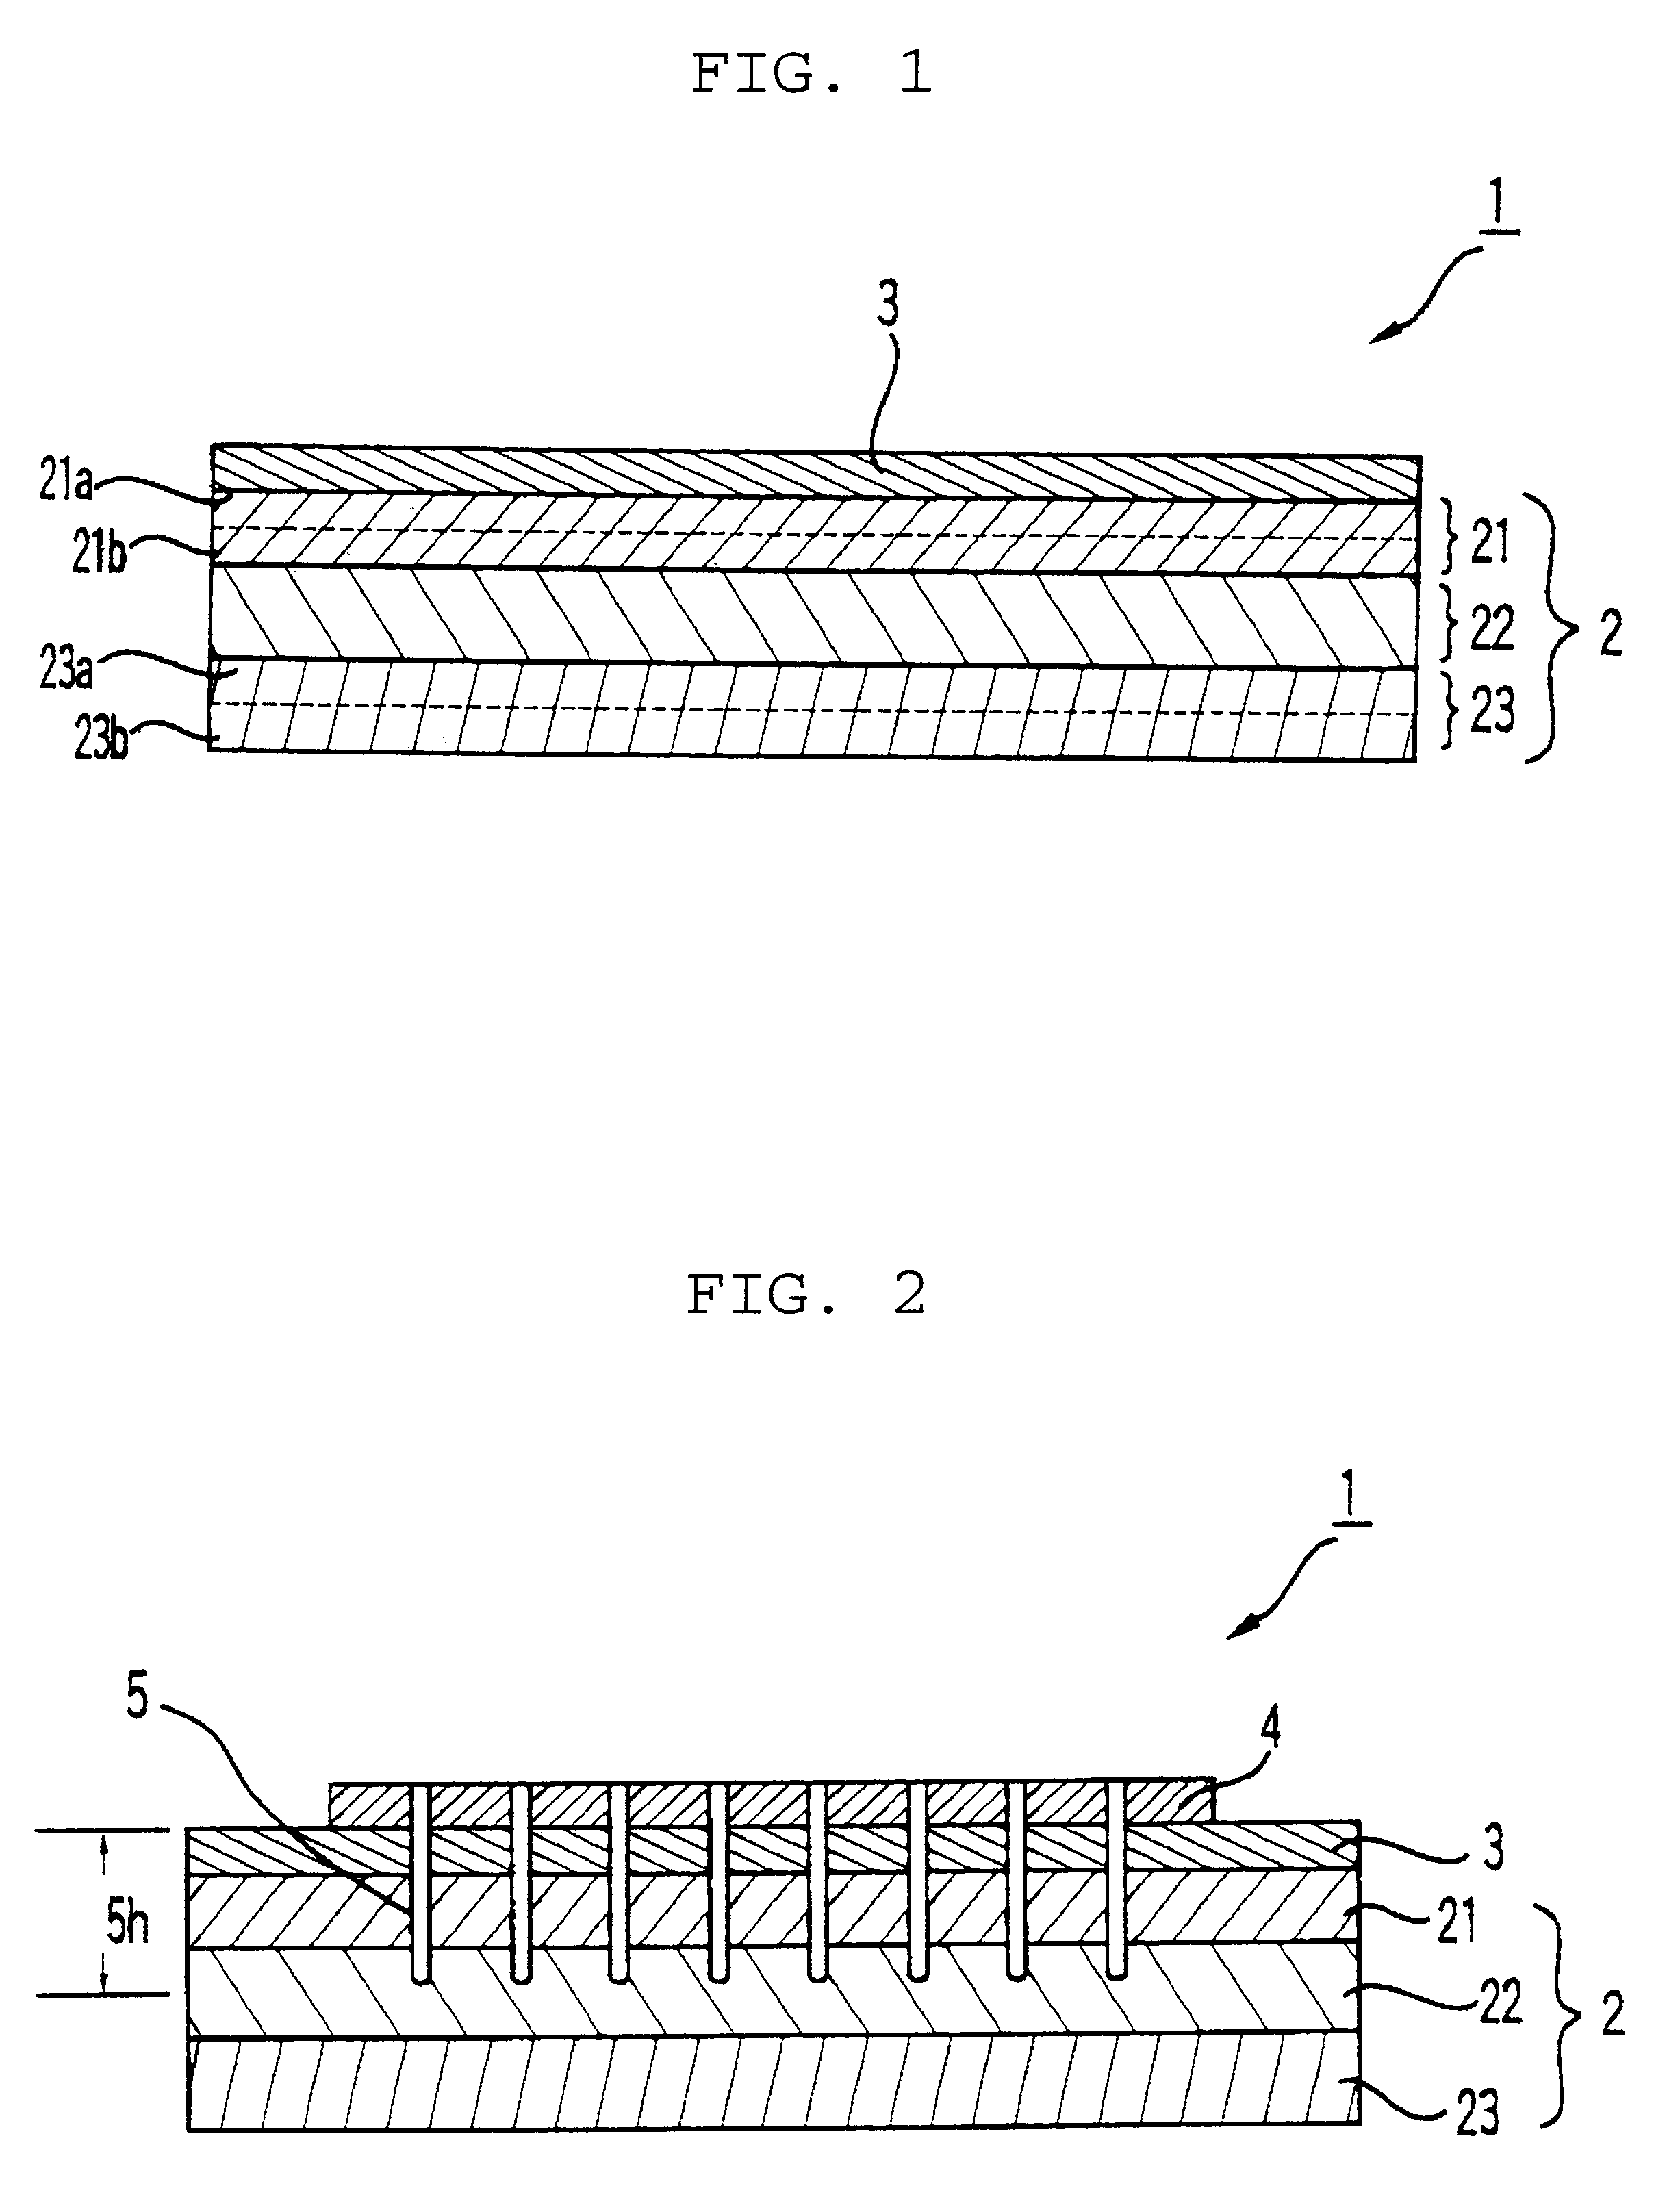 Dicing tape and a method of dicing a semiconductor wafer